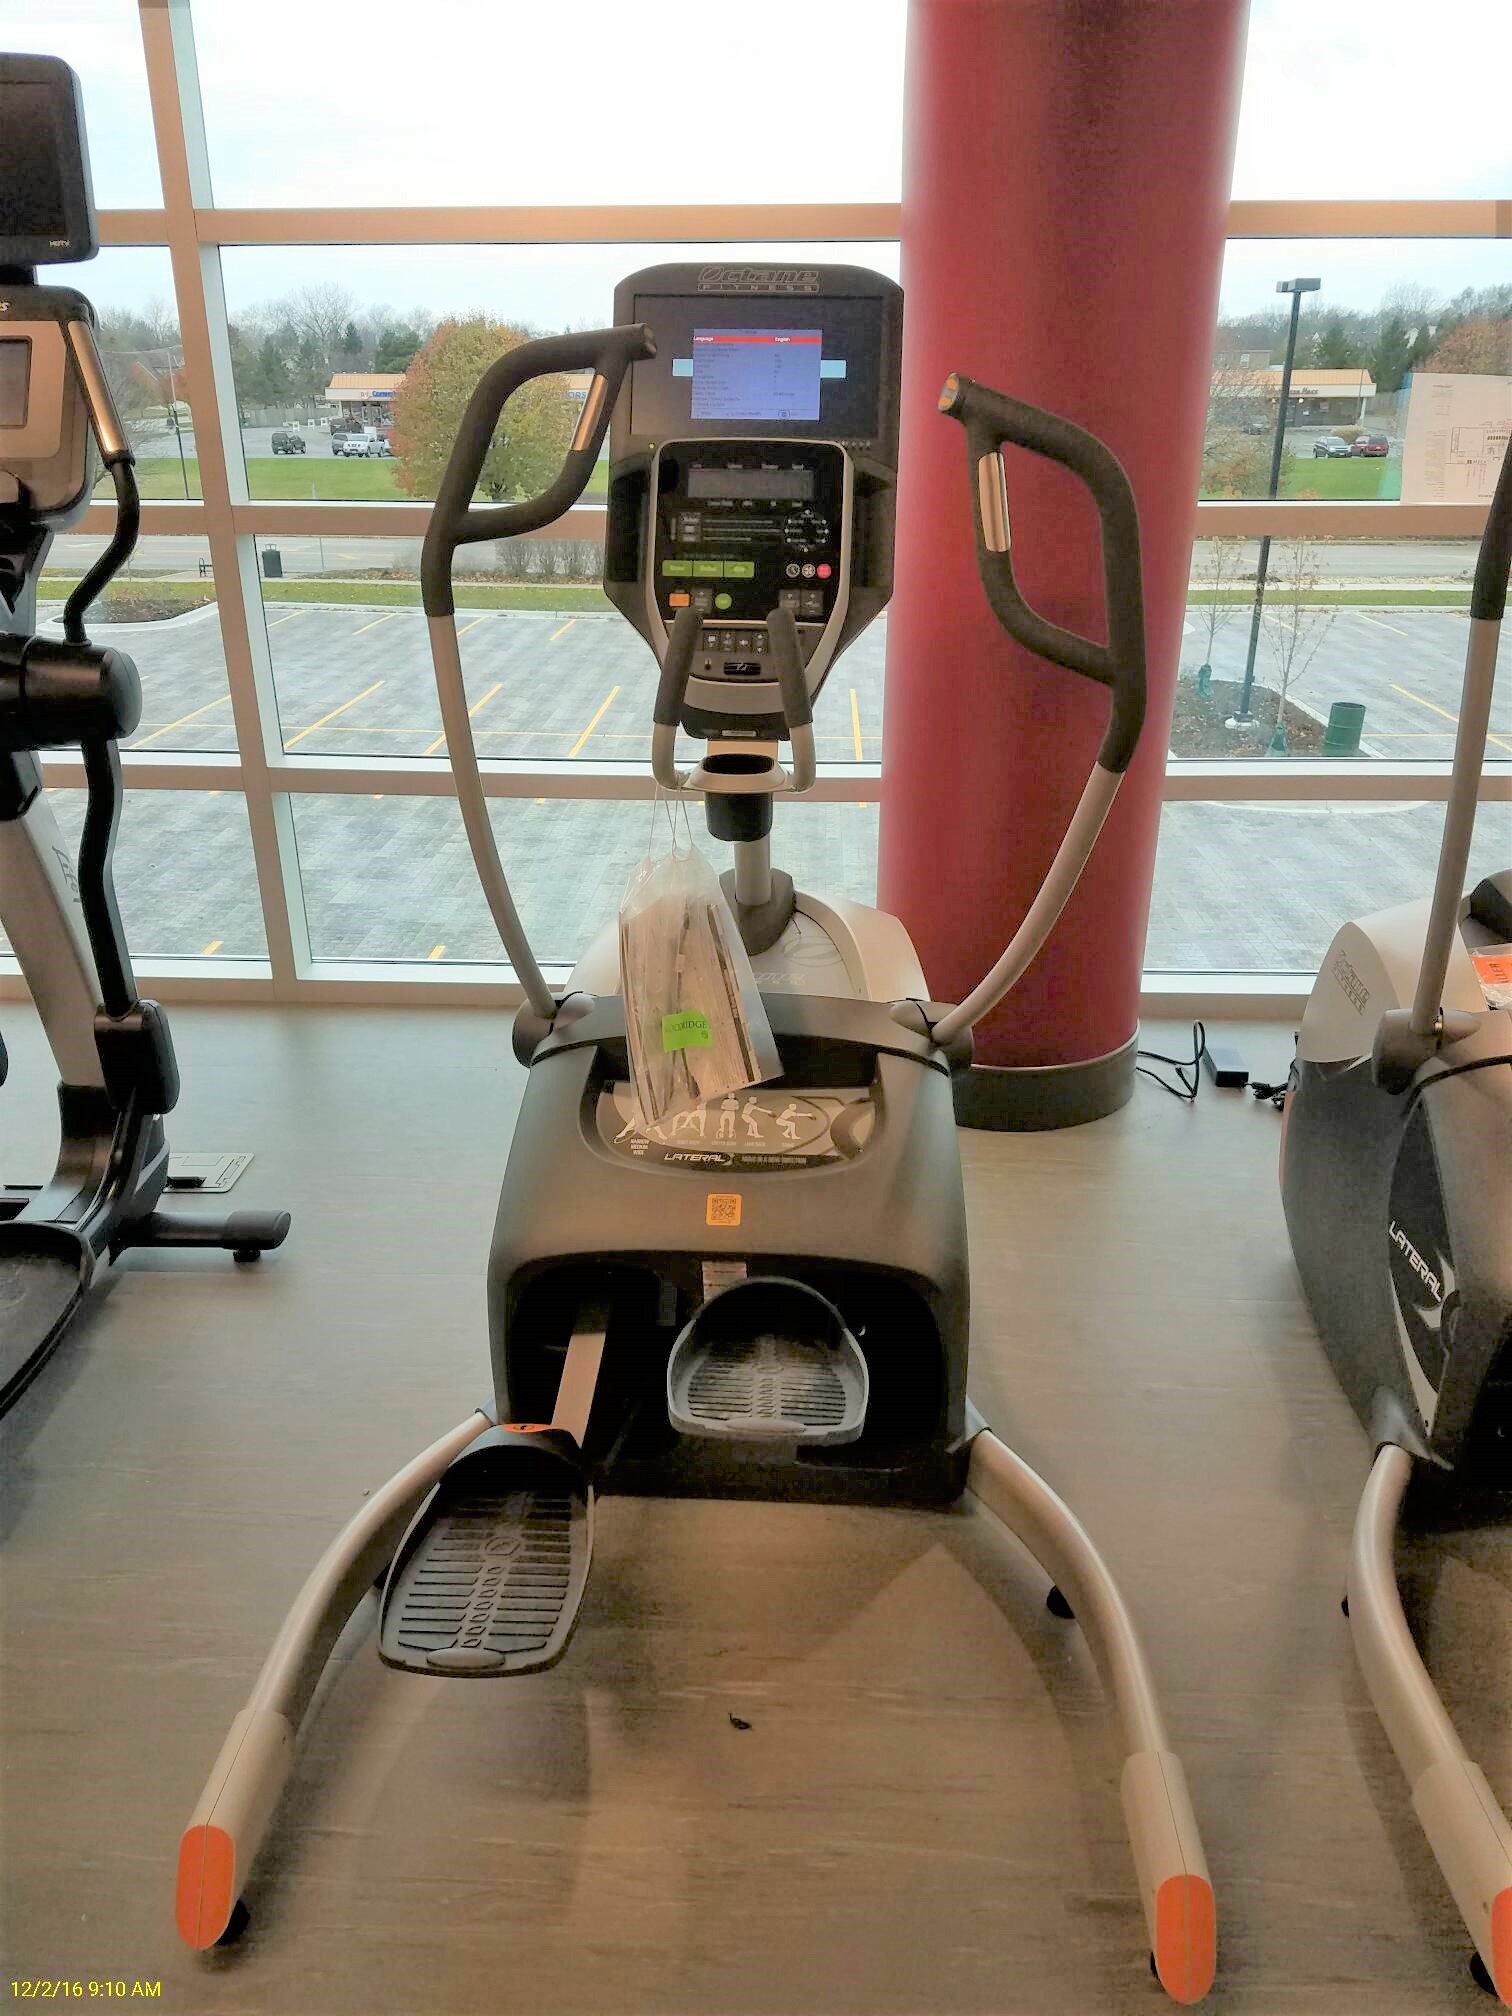 Woodridge Park District Athletic Recreation Center Transmotion Delivery Assembly Installation Relocation Gym Fitness Chicago Chicago land Washington California Fitness equipment